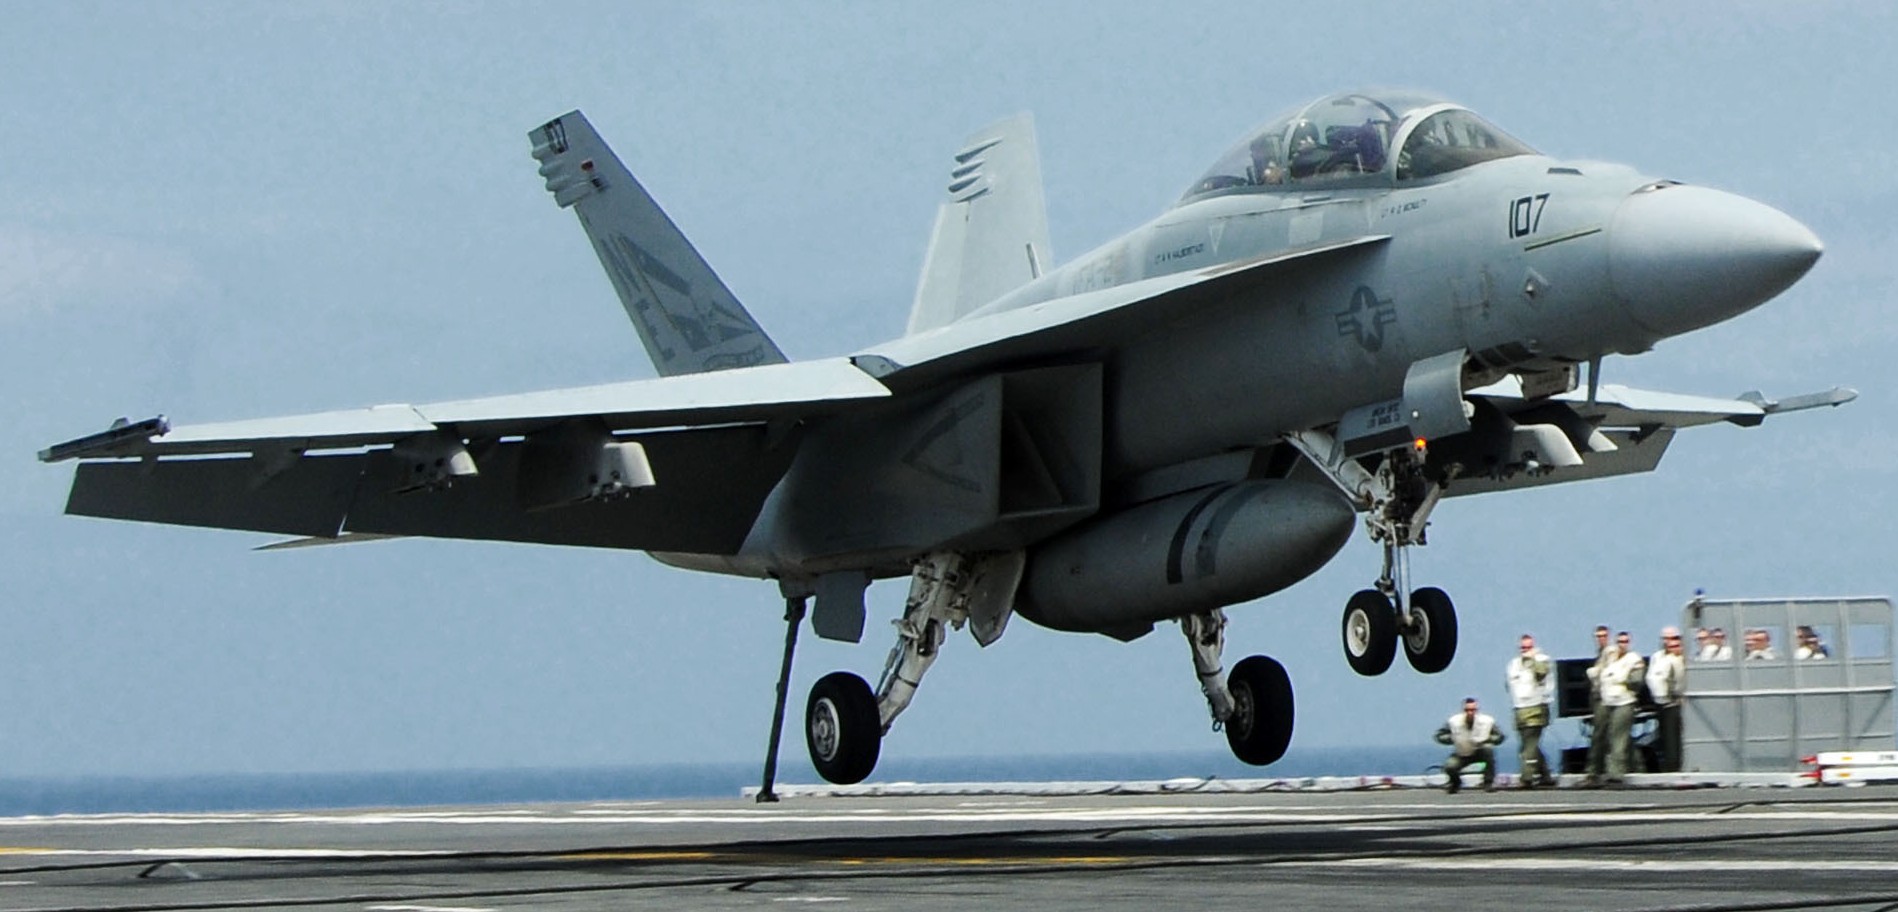 vfa-2 bounty hunters strike fighter squadron us navy f/a-18f super hornet carrier air wing cvw-2 uss ronald reagan cvn-76 52